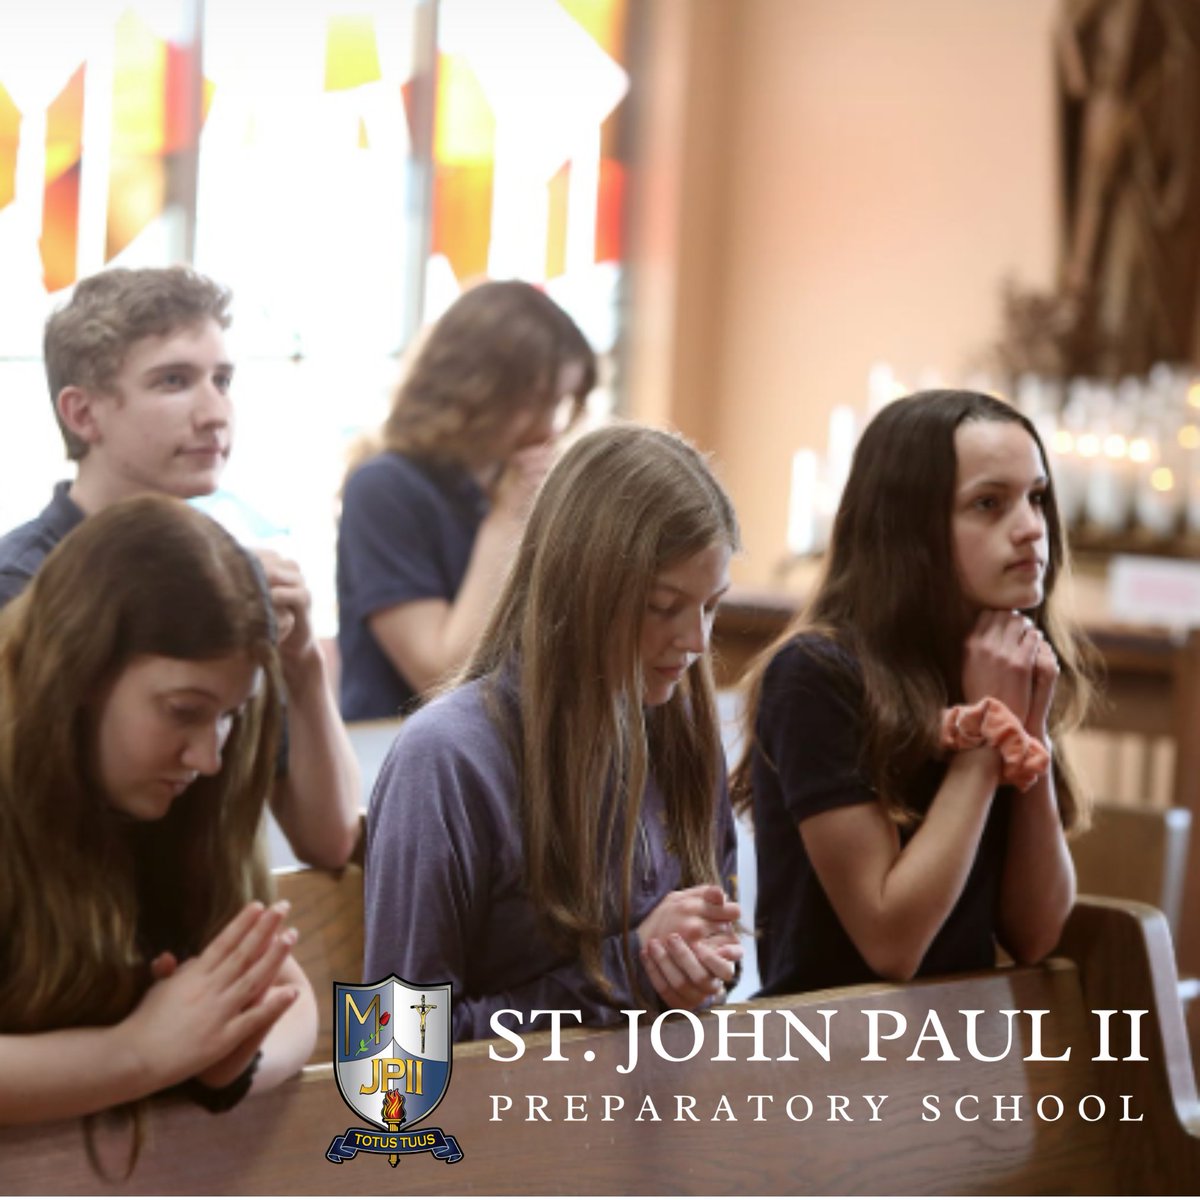 St. John Paul II Catholic Preparatory School in St. Charles, Missouri, is the latest Newman Guide Recommended school. 

If your school is searching for a clear differentiator, become Newman Guide Recommended! 

Apply NOW: ngschool.cardinalnewmansociety.org

#newmanguide #catholicschools